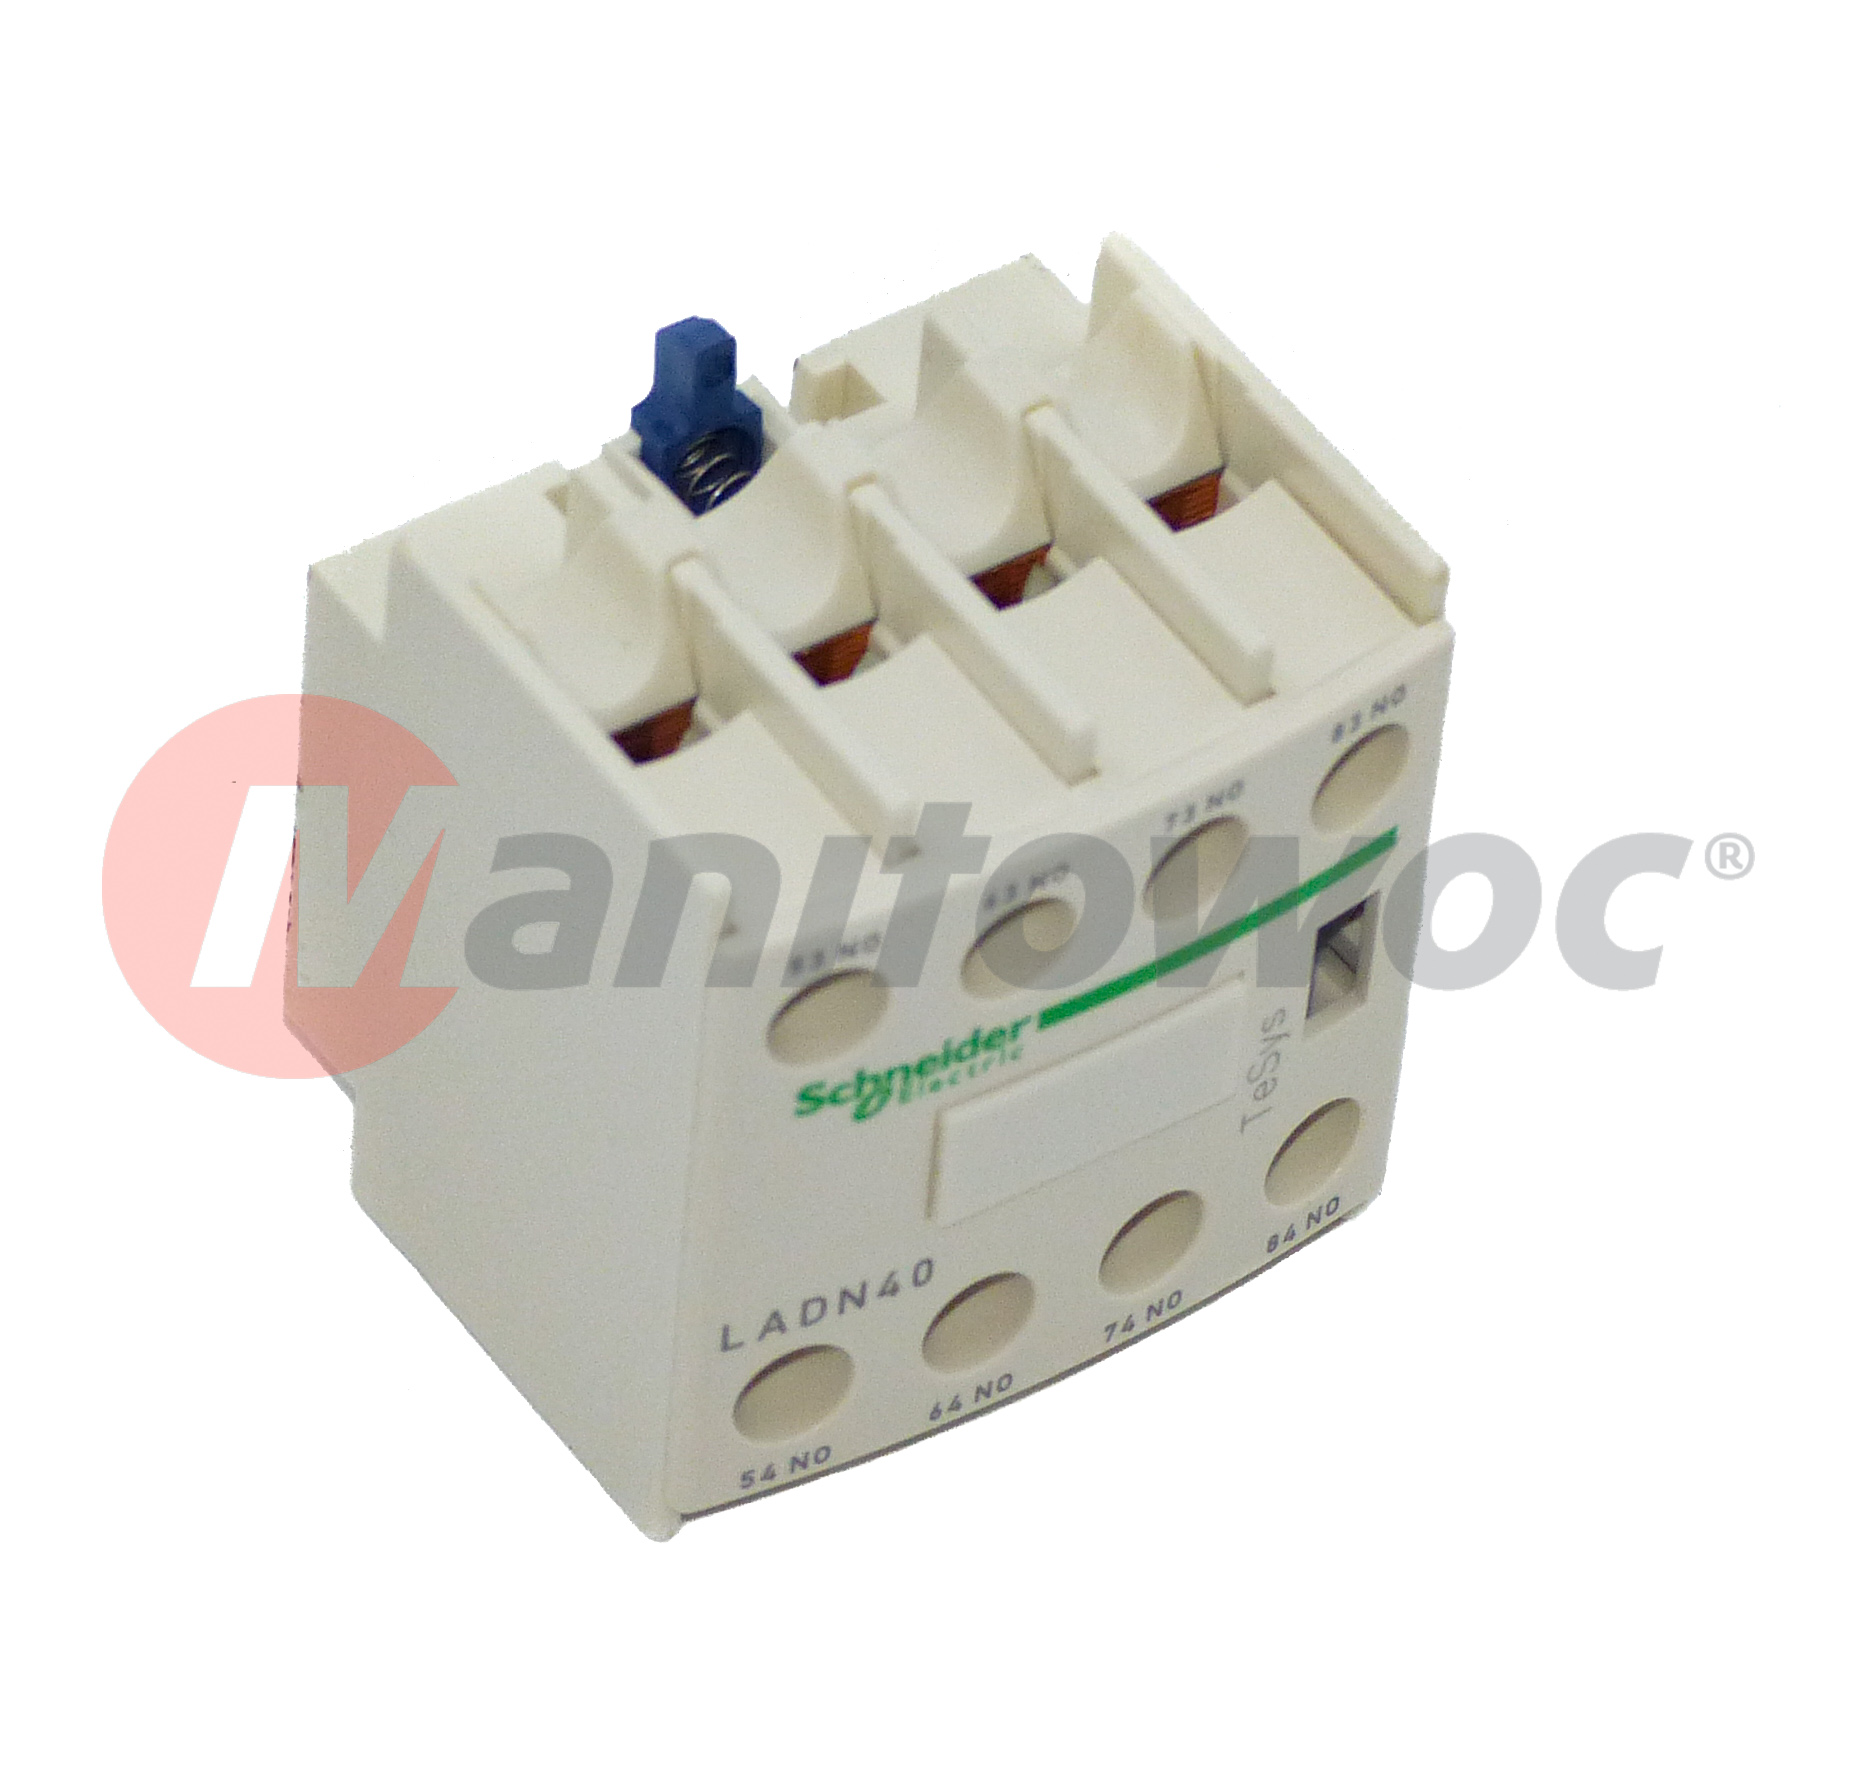 G-04411-46 - "AUXILIARY BLOCK|4F FRONT"